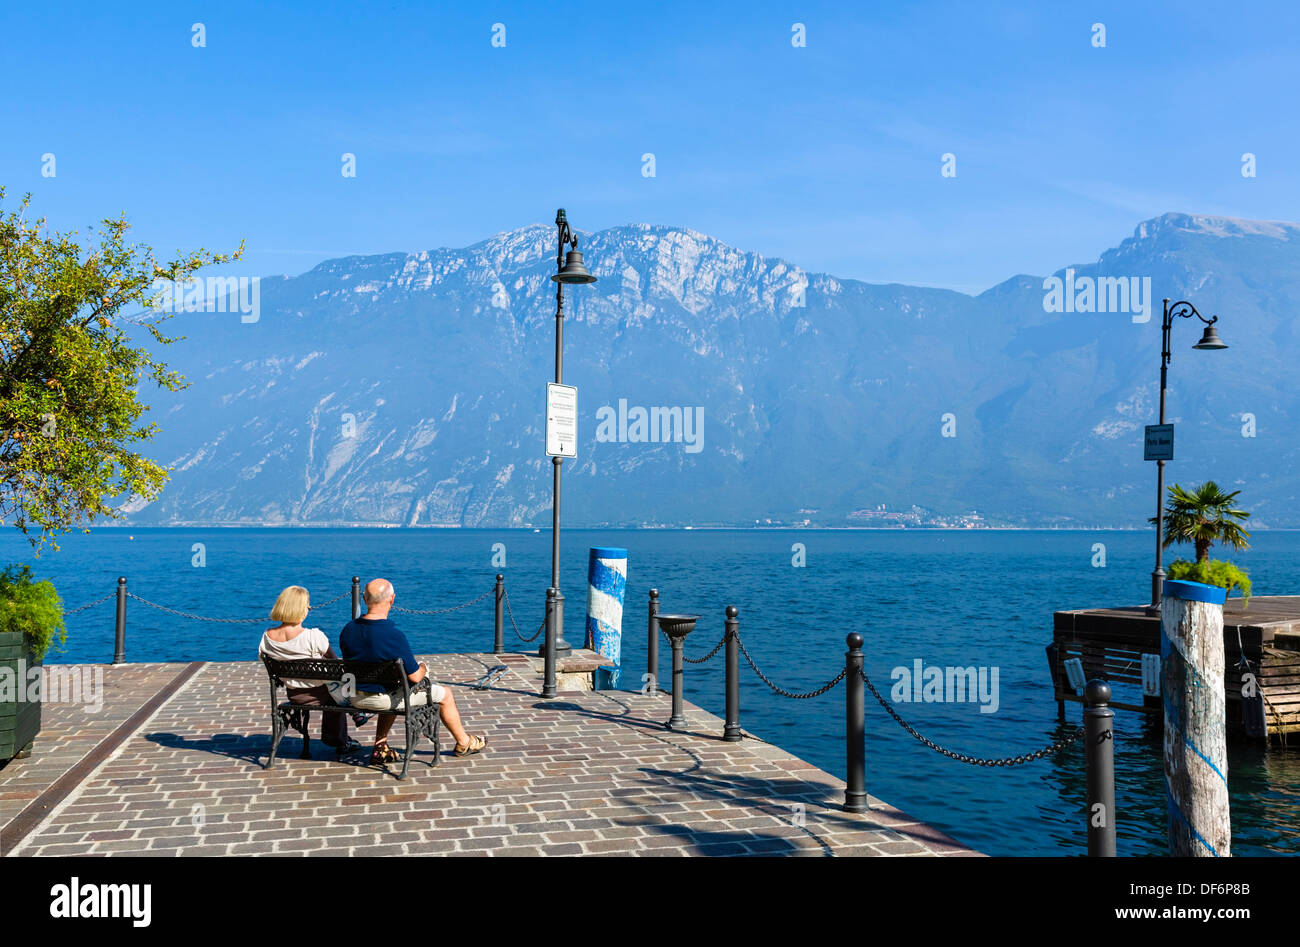 Middle aged couple sitting on the lakefront in Limone sul Garda, Lake Garda, Italian Lakes, Lombardy, Italy Stock Photo